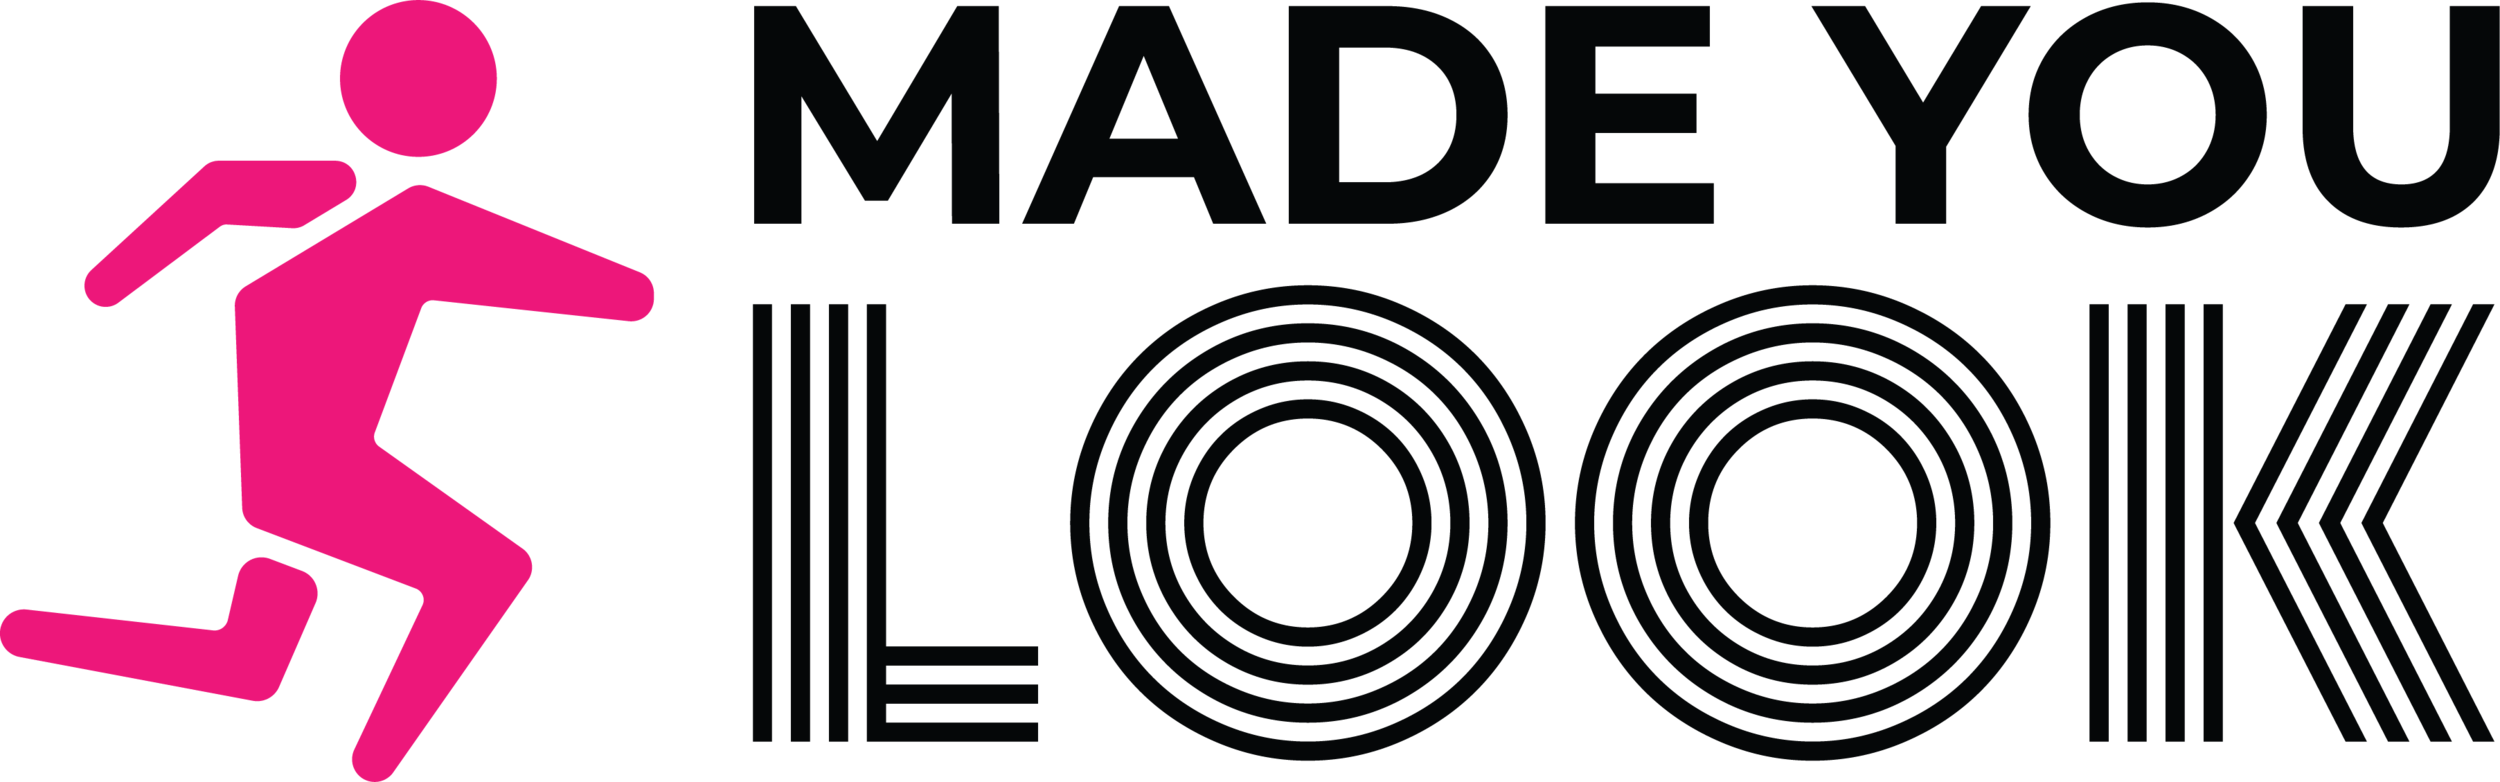 MadeYouLookLogo.png